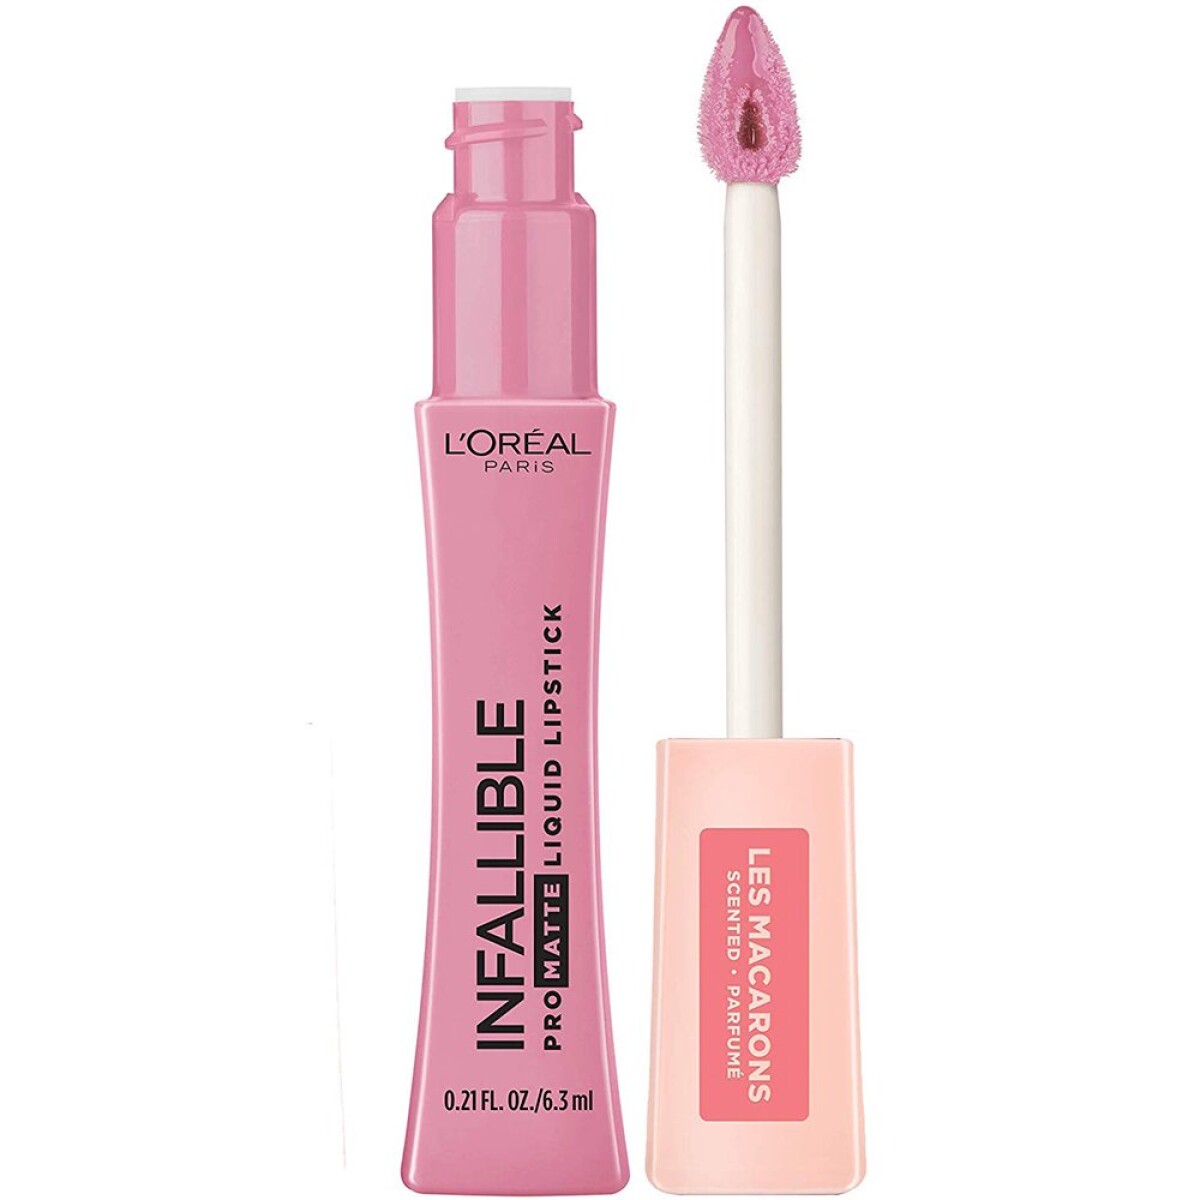 Labial L'oreal 818 Infallible Dose Of Rose 